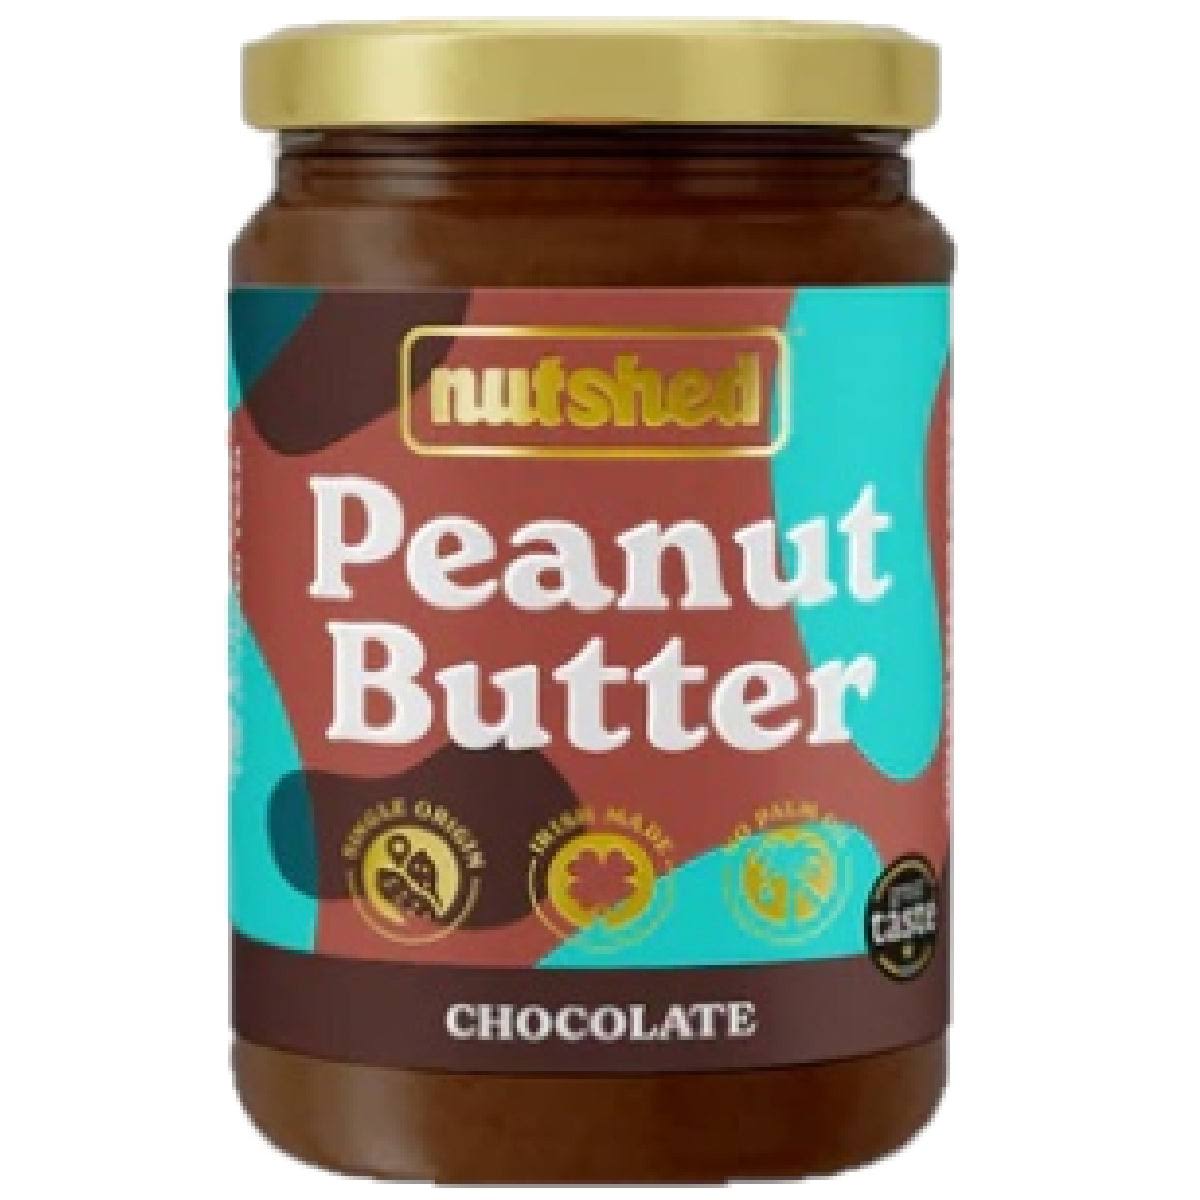 Condiments & Preserves Nutshed Chocolate Peanut Butter 290g